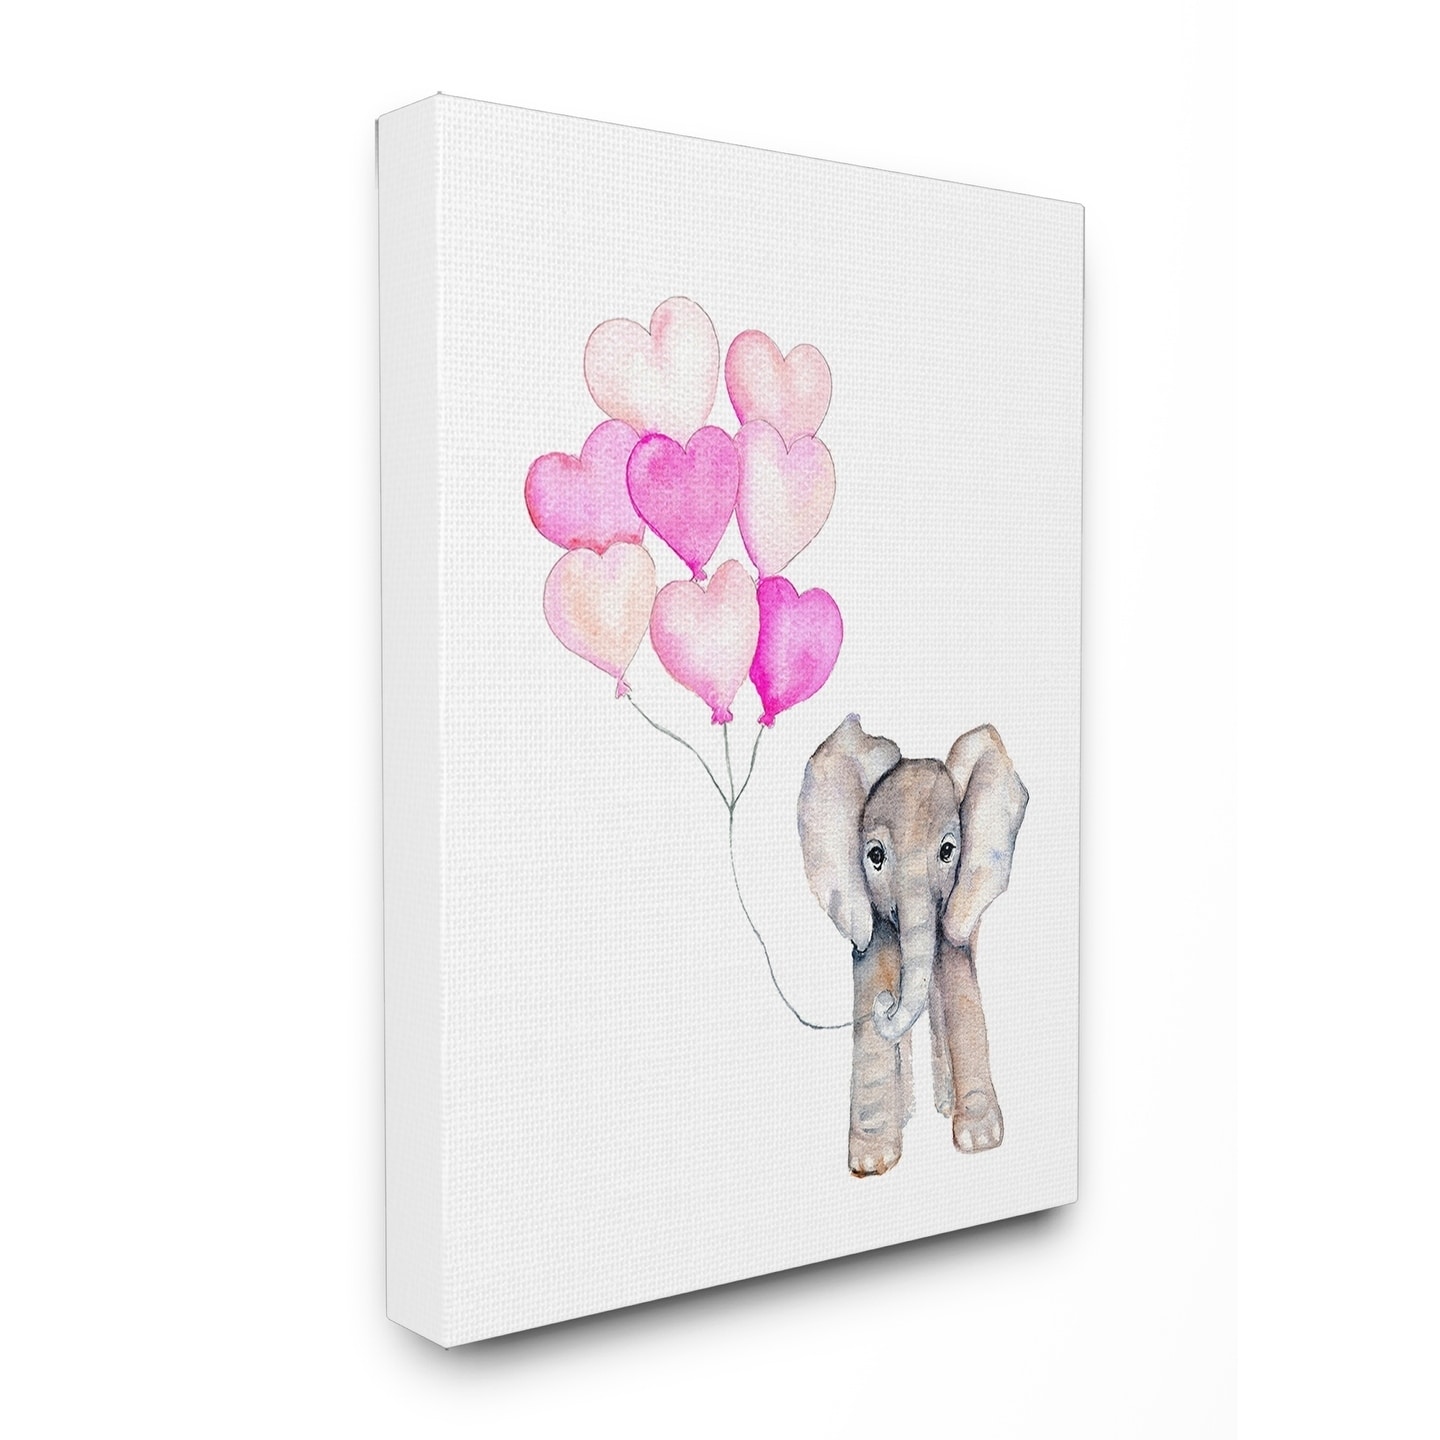 Baby Elephant with Pink Heart Balloons Stretched Canvas Wall Art